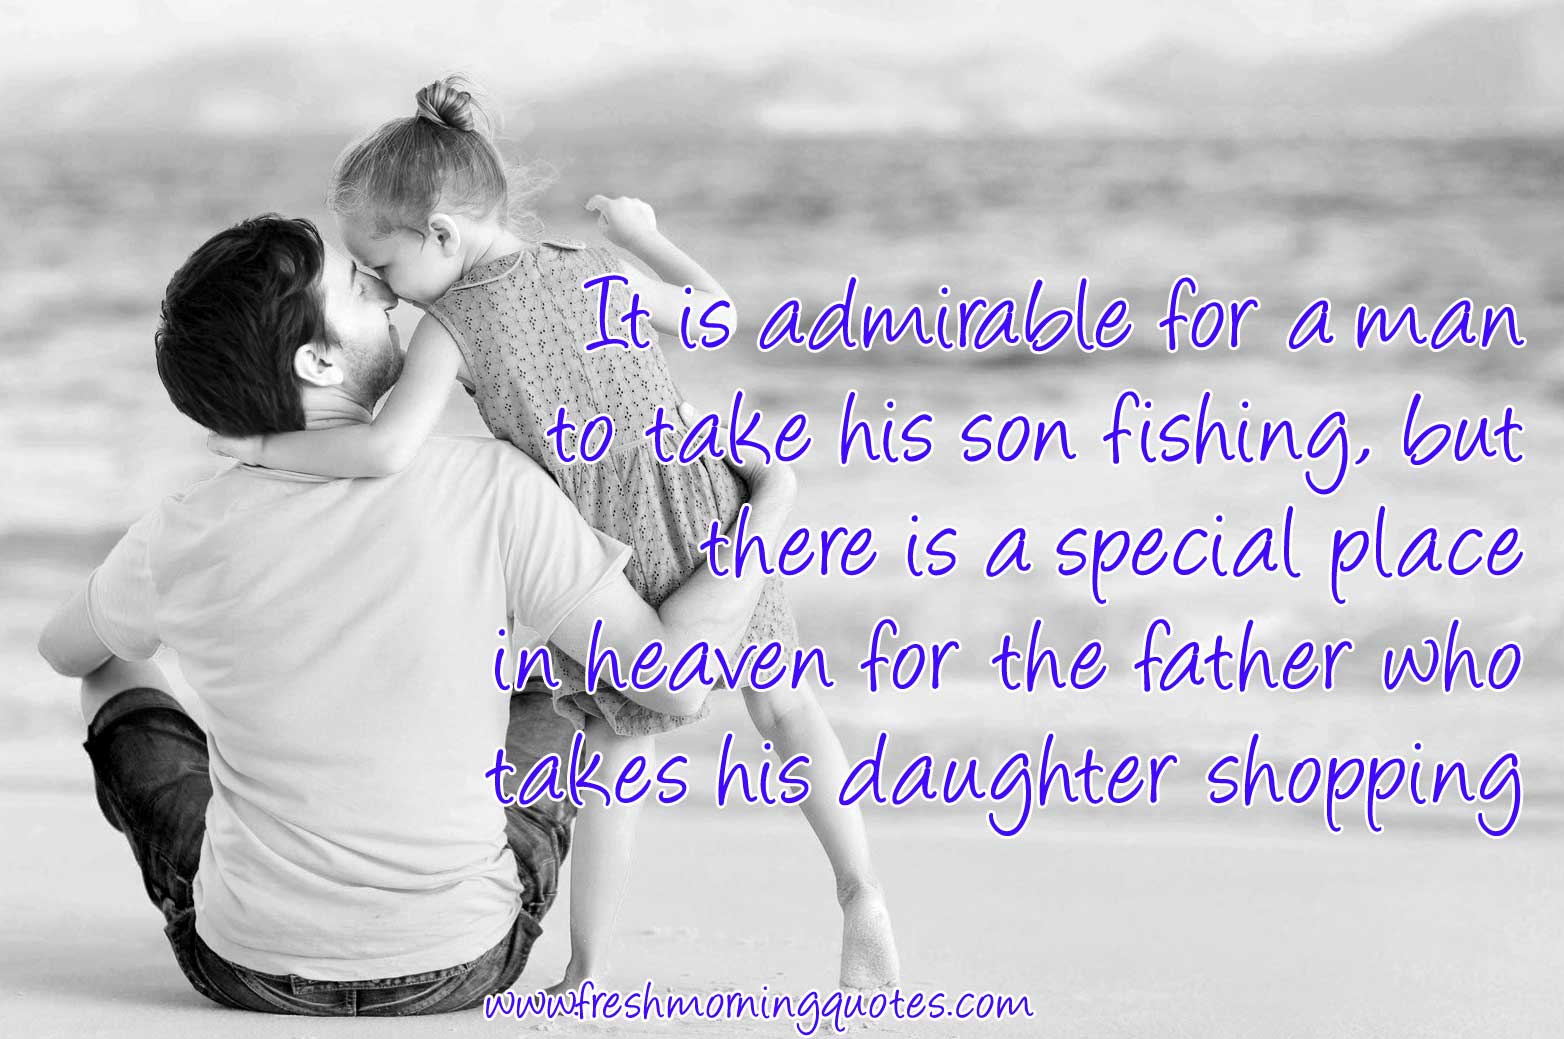 Sweetest Father Daughter Quotes With Image Touching